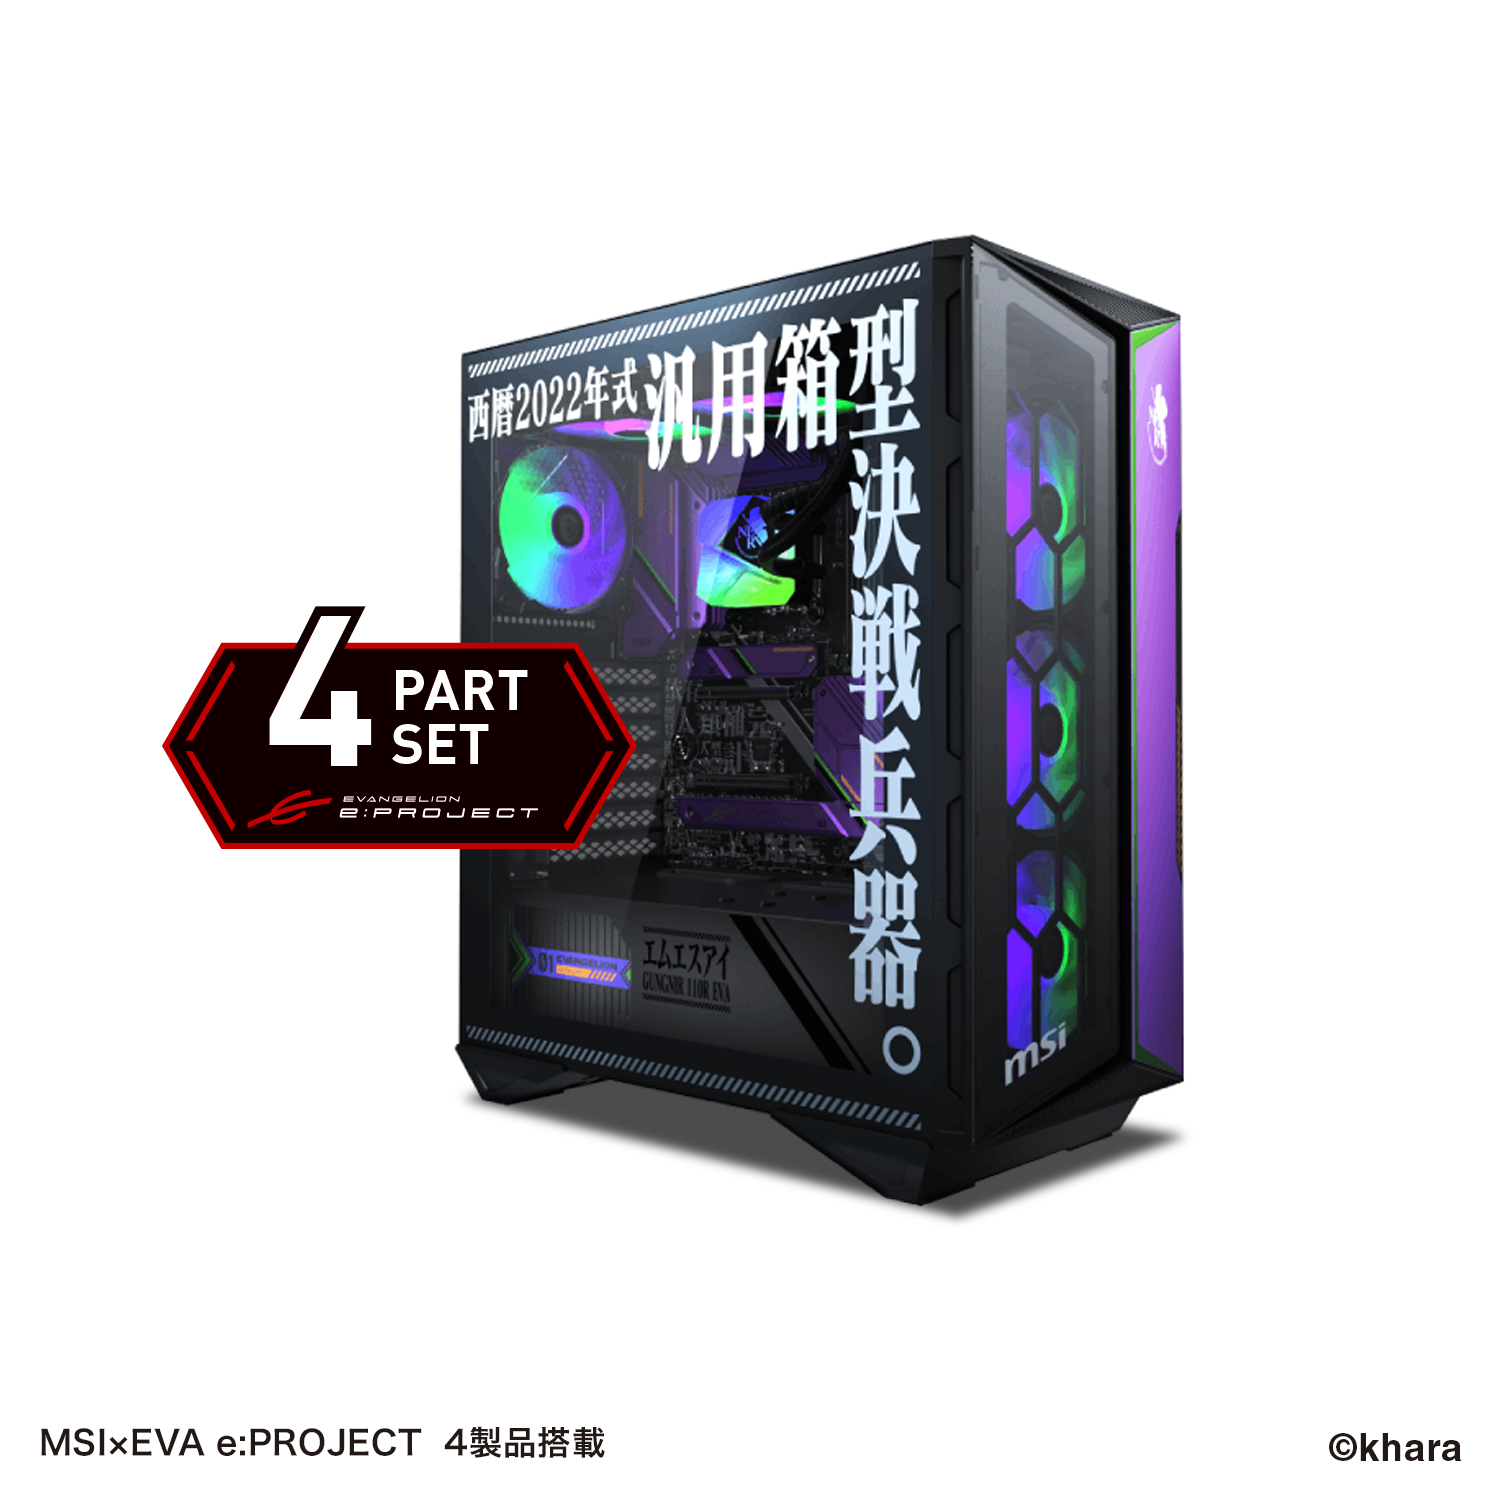 Powered by MSI X EVANGELION e:PROJECT ゲーミングPC BTO